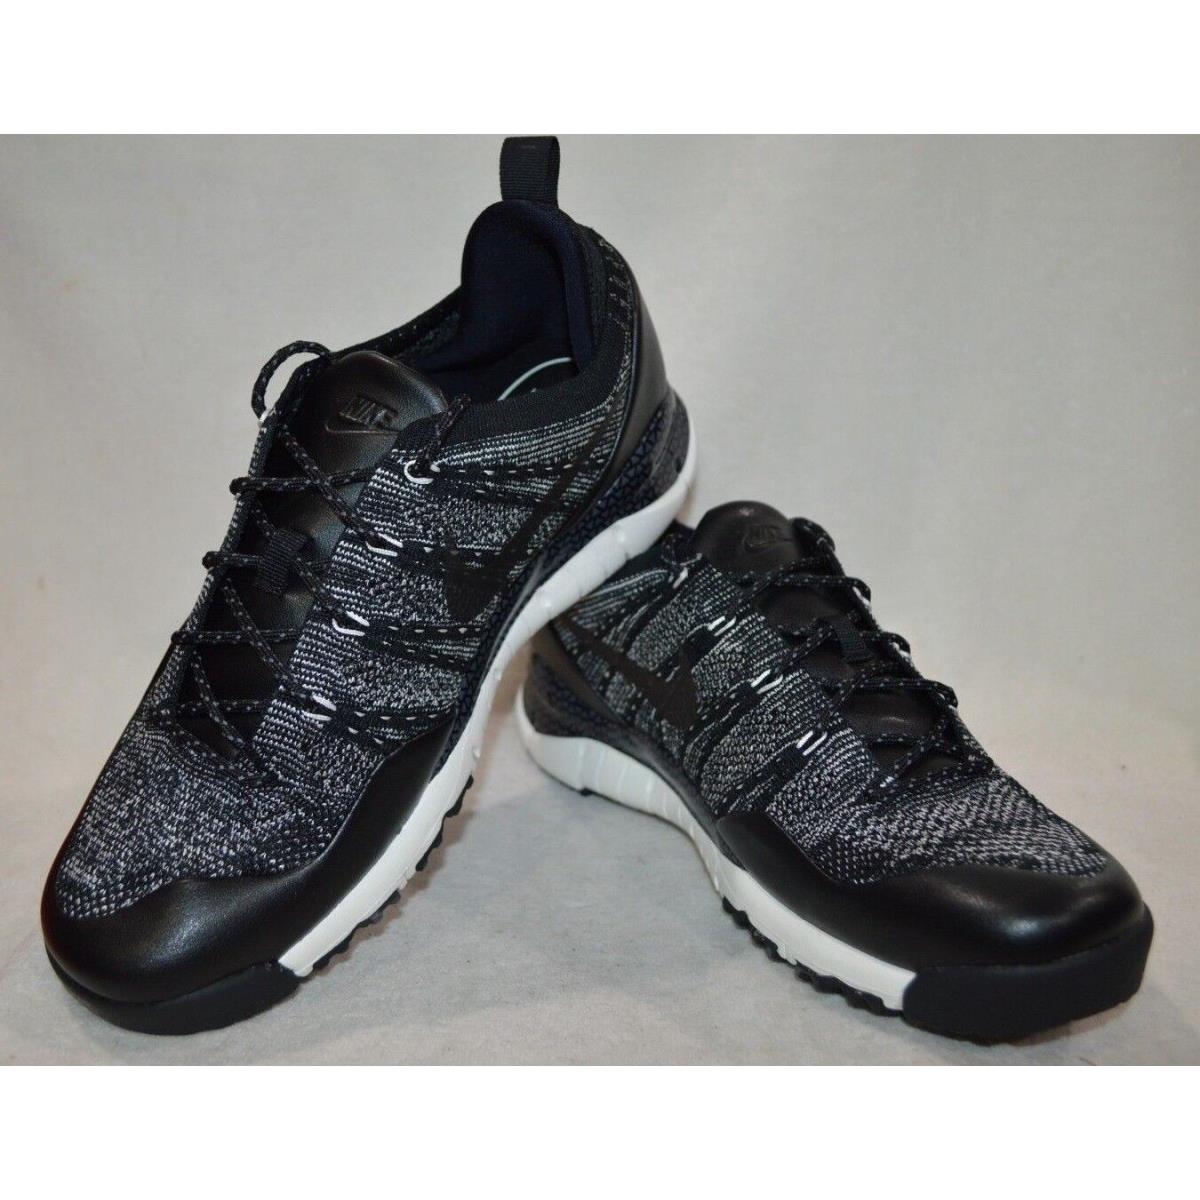 Nike Lupinek Flyknit Low Sail/black/anthracite Sneakers-asst Size 882685-100